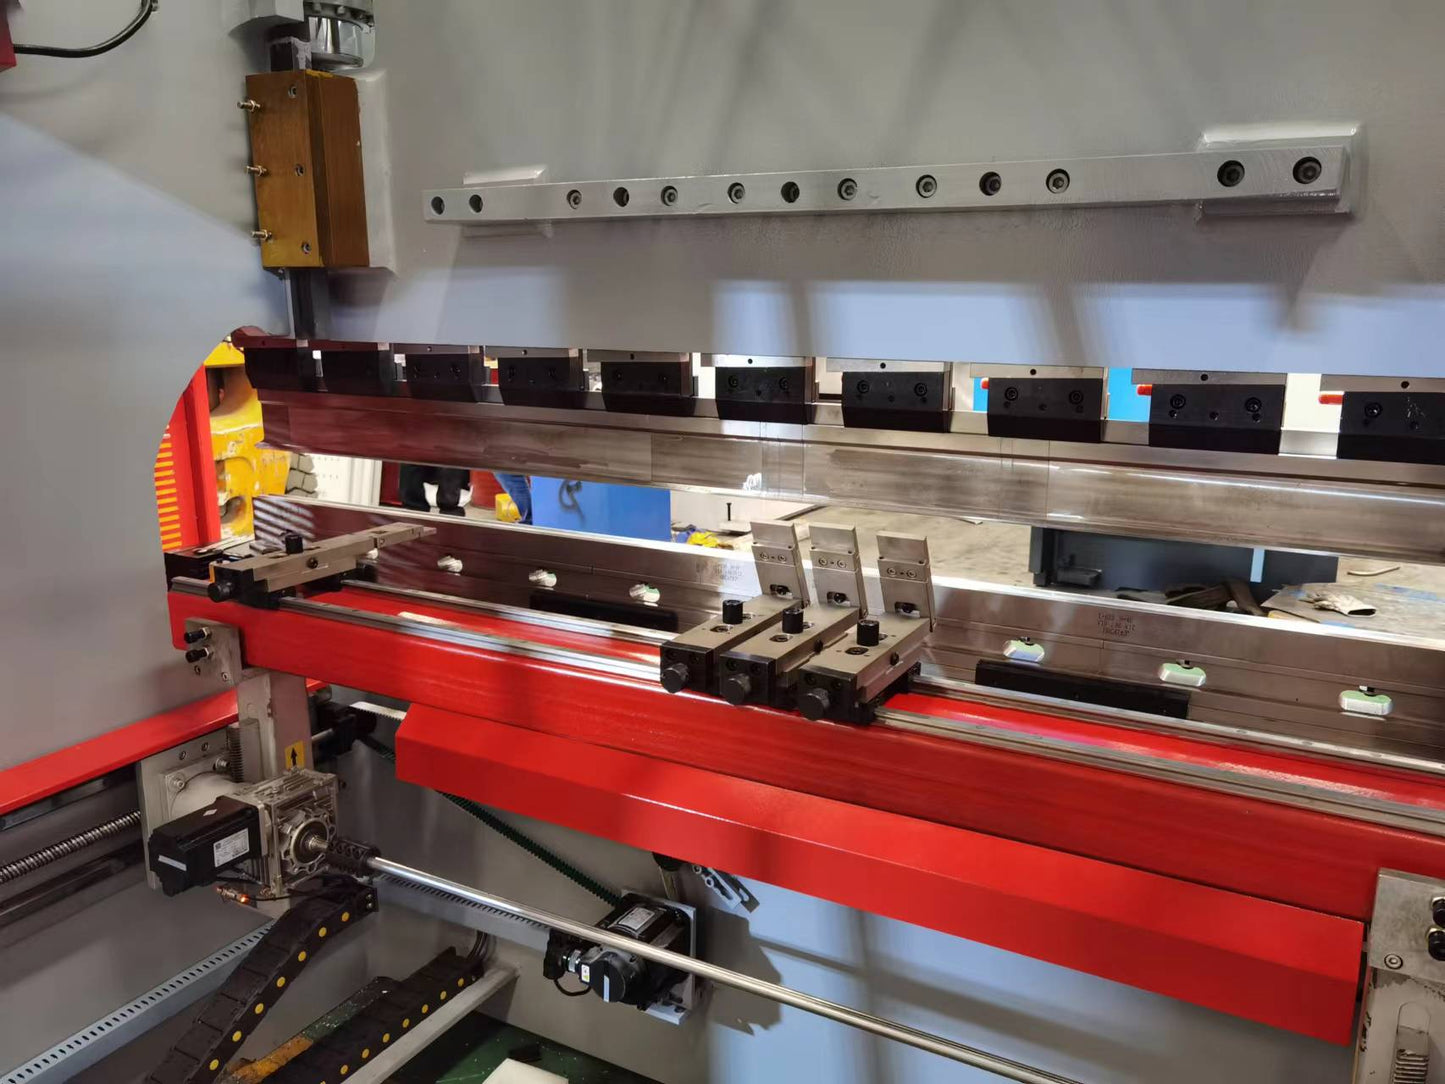 PRECISION SERIES PRESS BRAKES - Multi Axis with Robust Performance